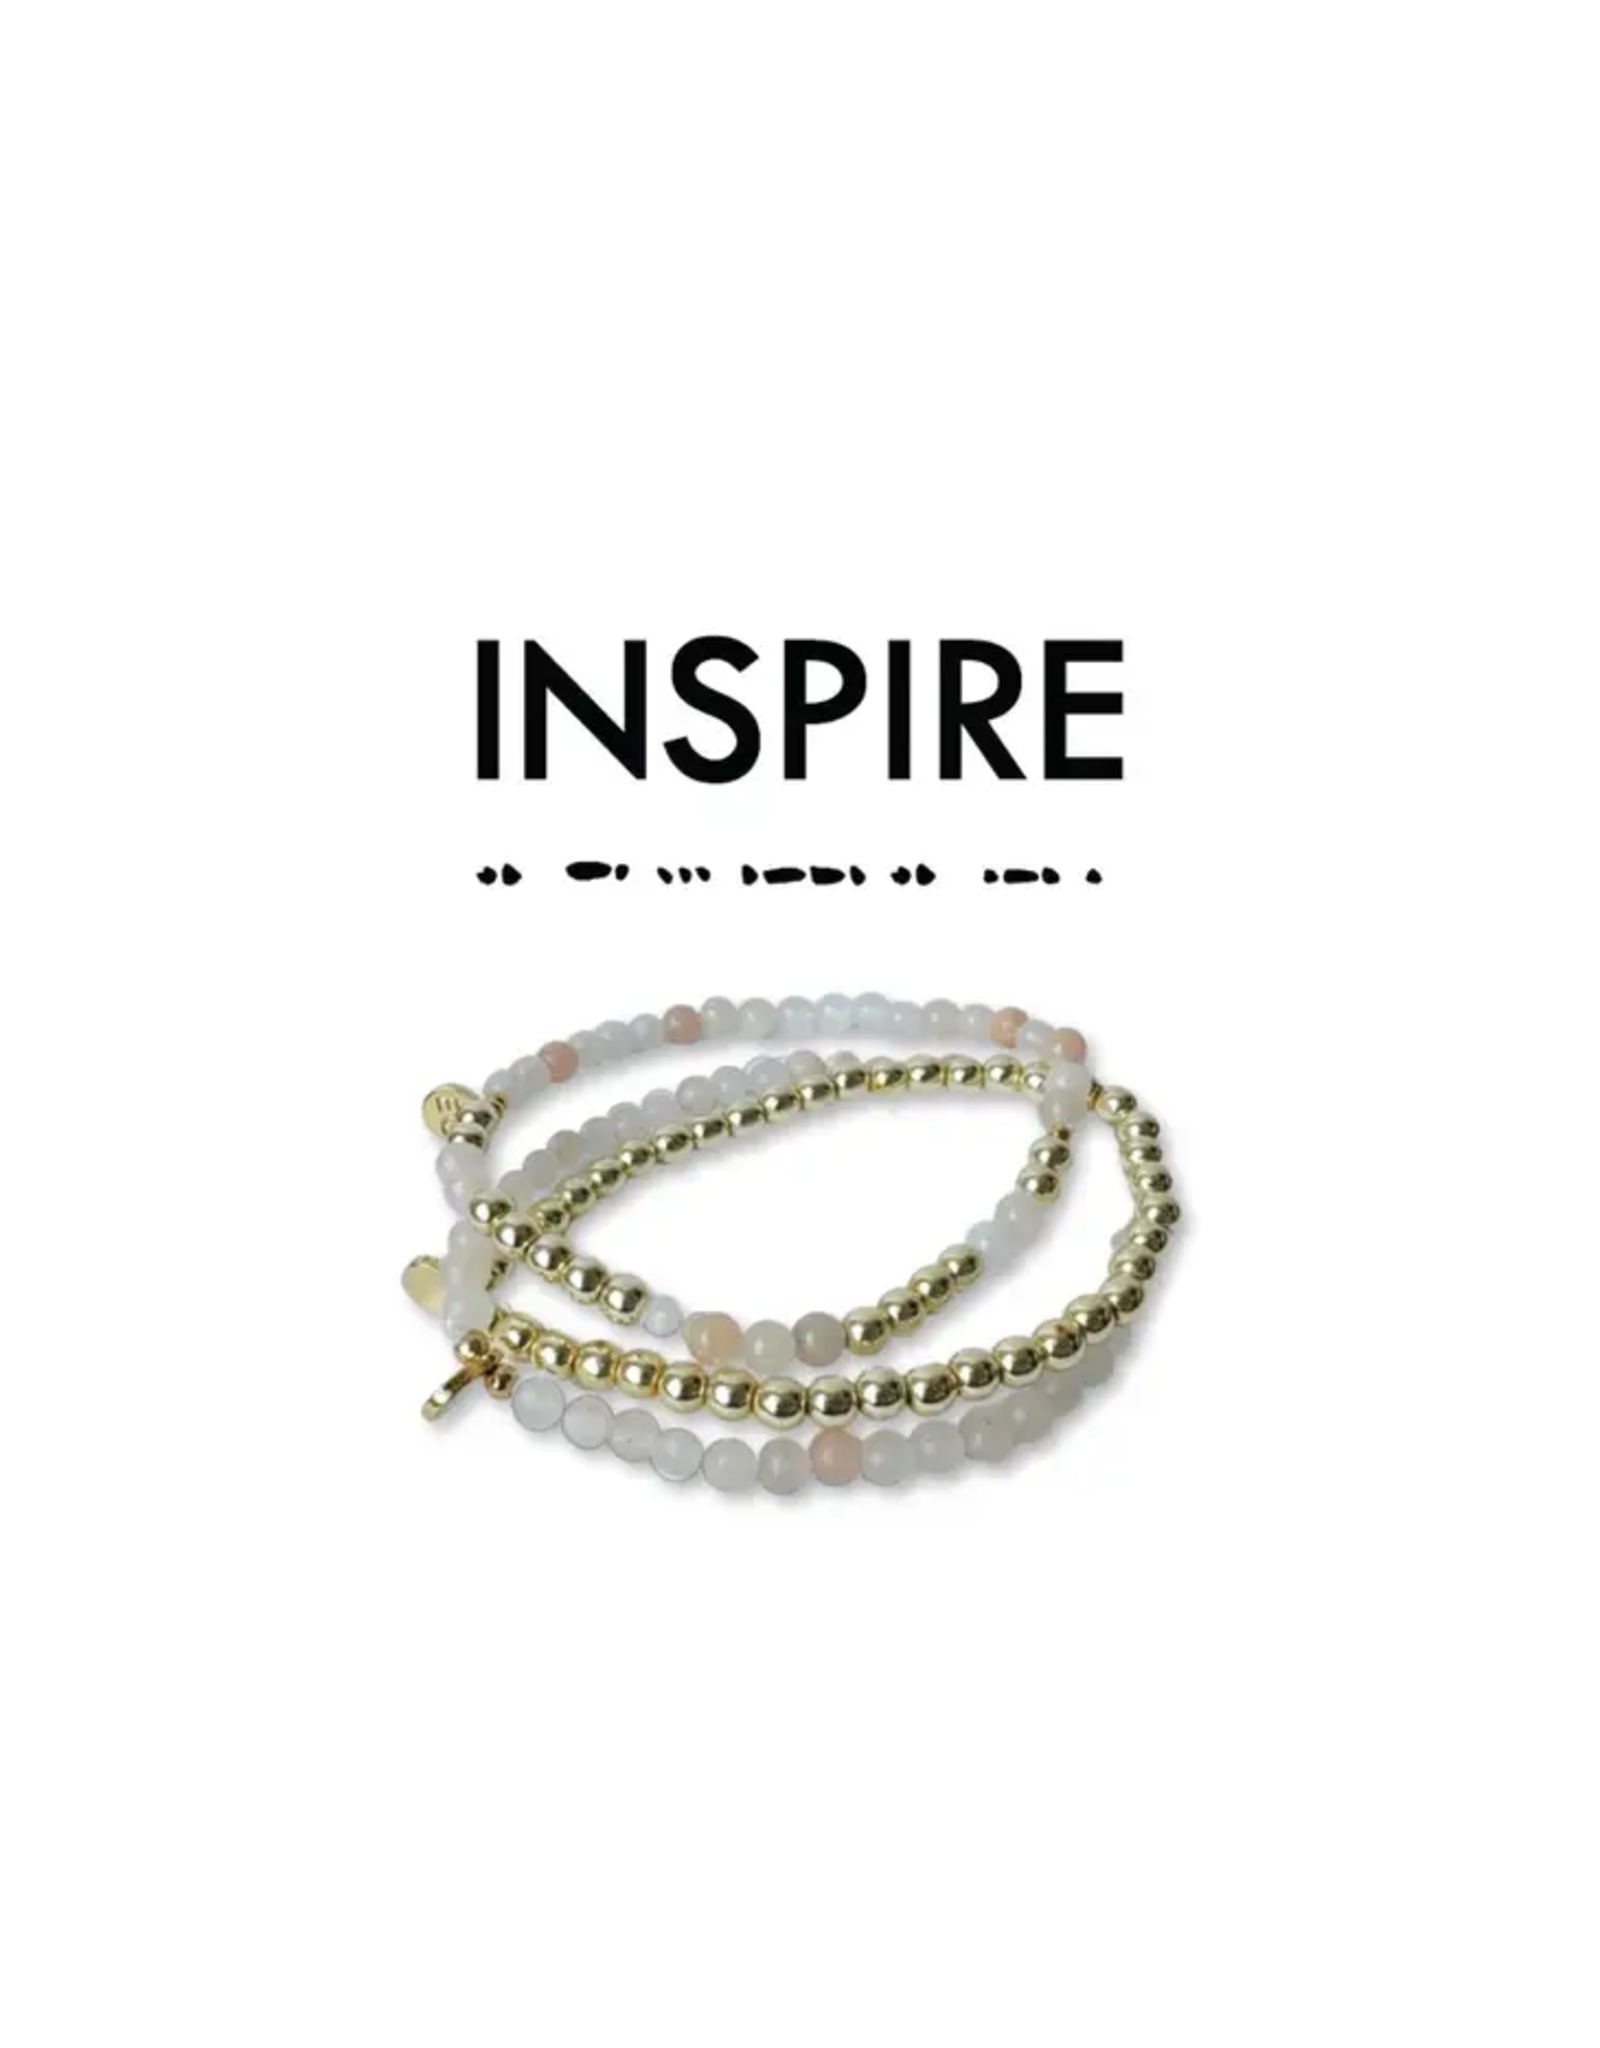 Trade roots Morse Code Stacking Bracelet, Thailand Inspire - Trade Roots